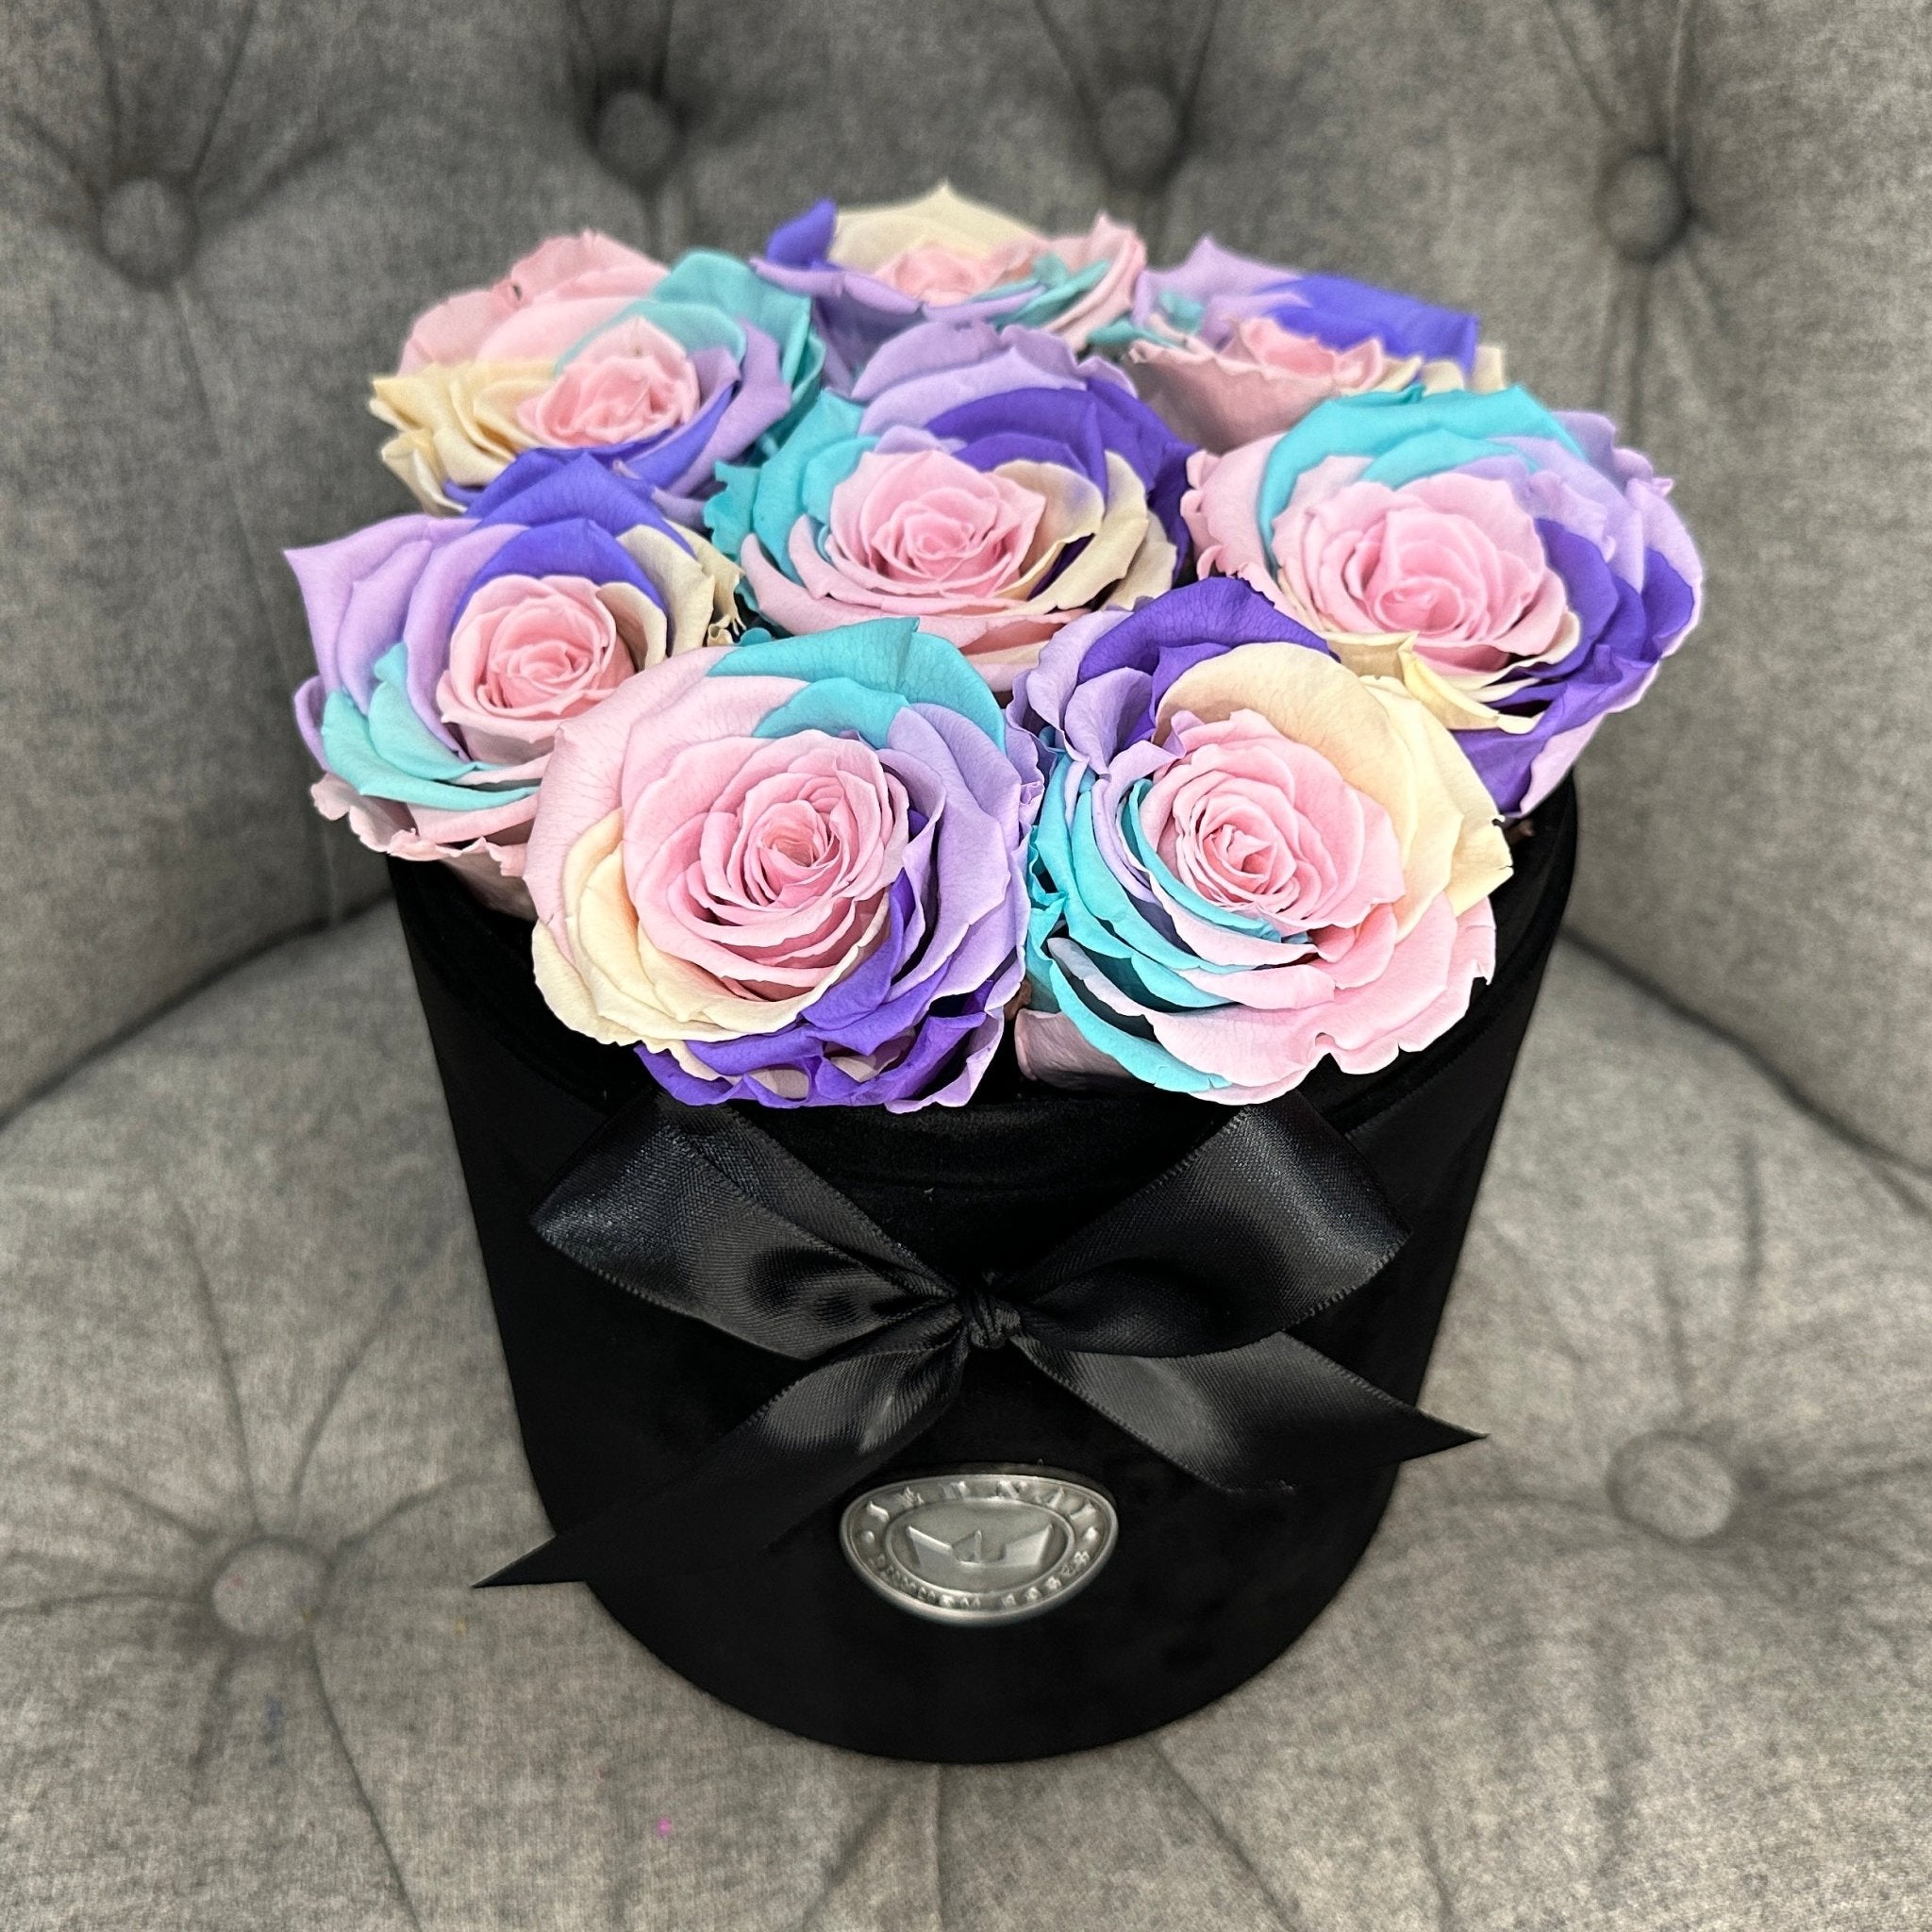 Medium Black Suede Forever Rose Box - Over The Rainbow Eternal Roses - Jednay Roses